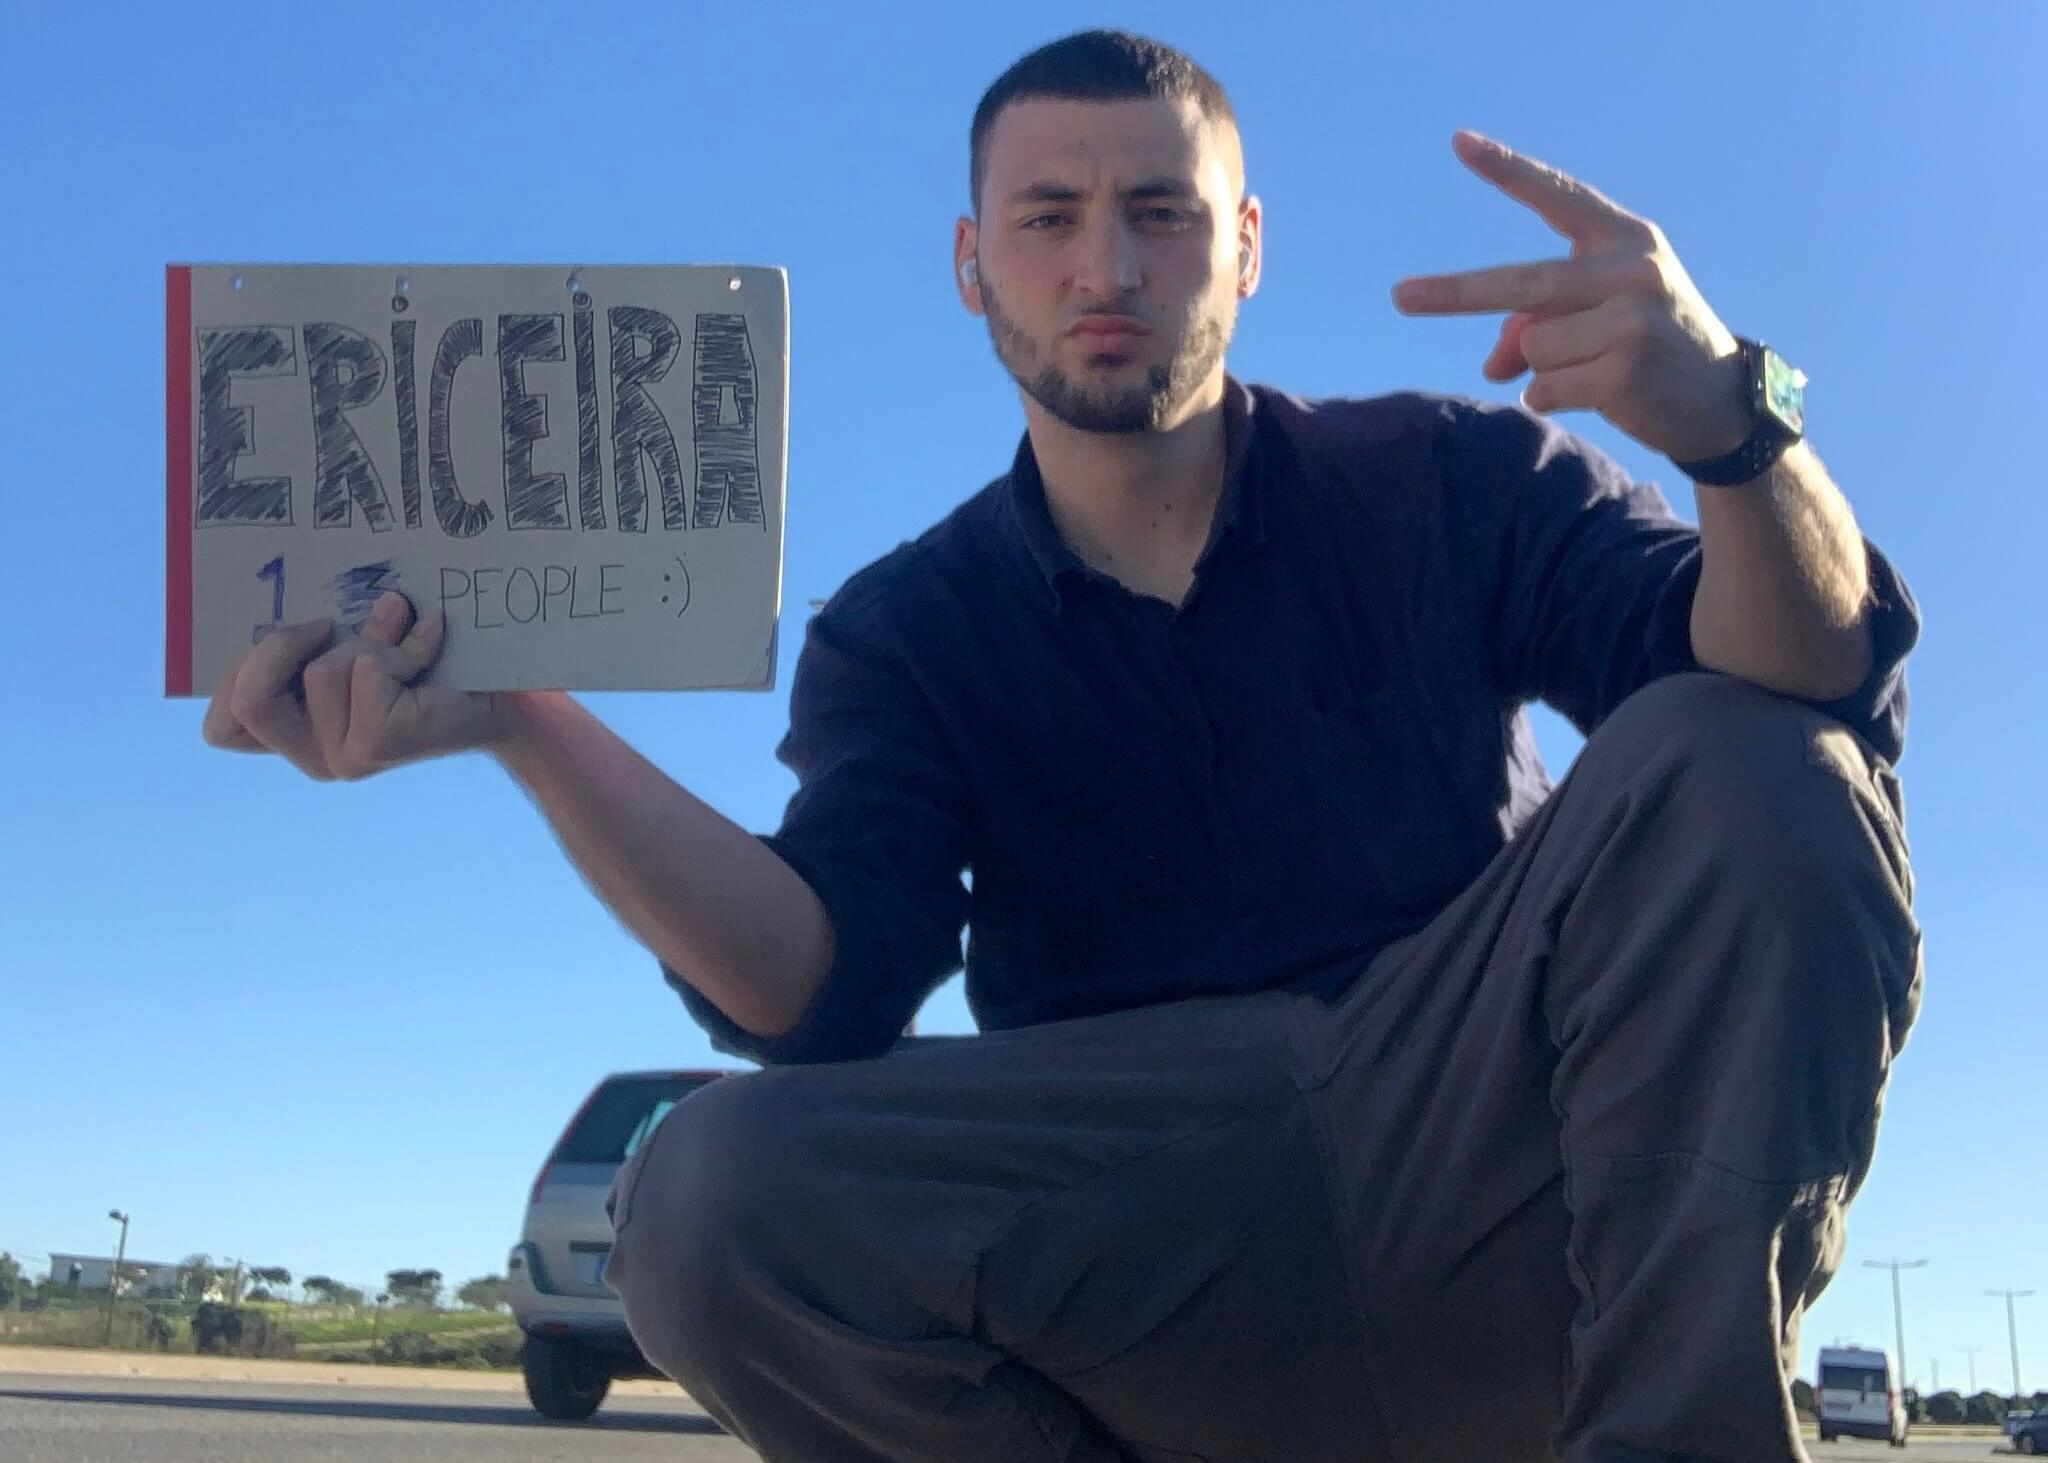 Man crouching by the side of a road with a cardboard hitchhike sign for Ericeira